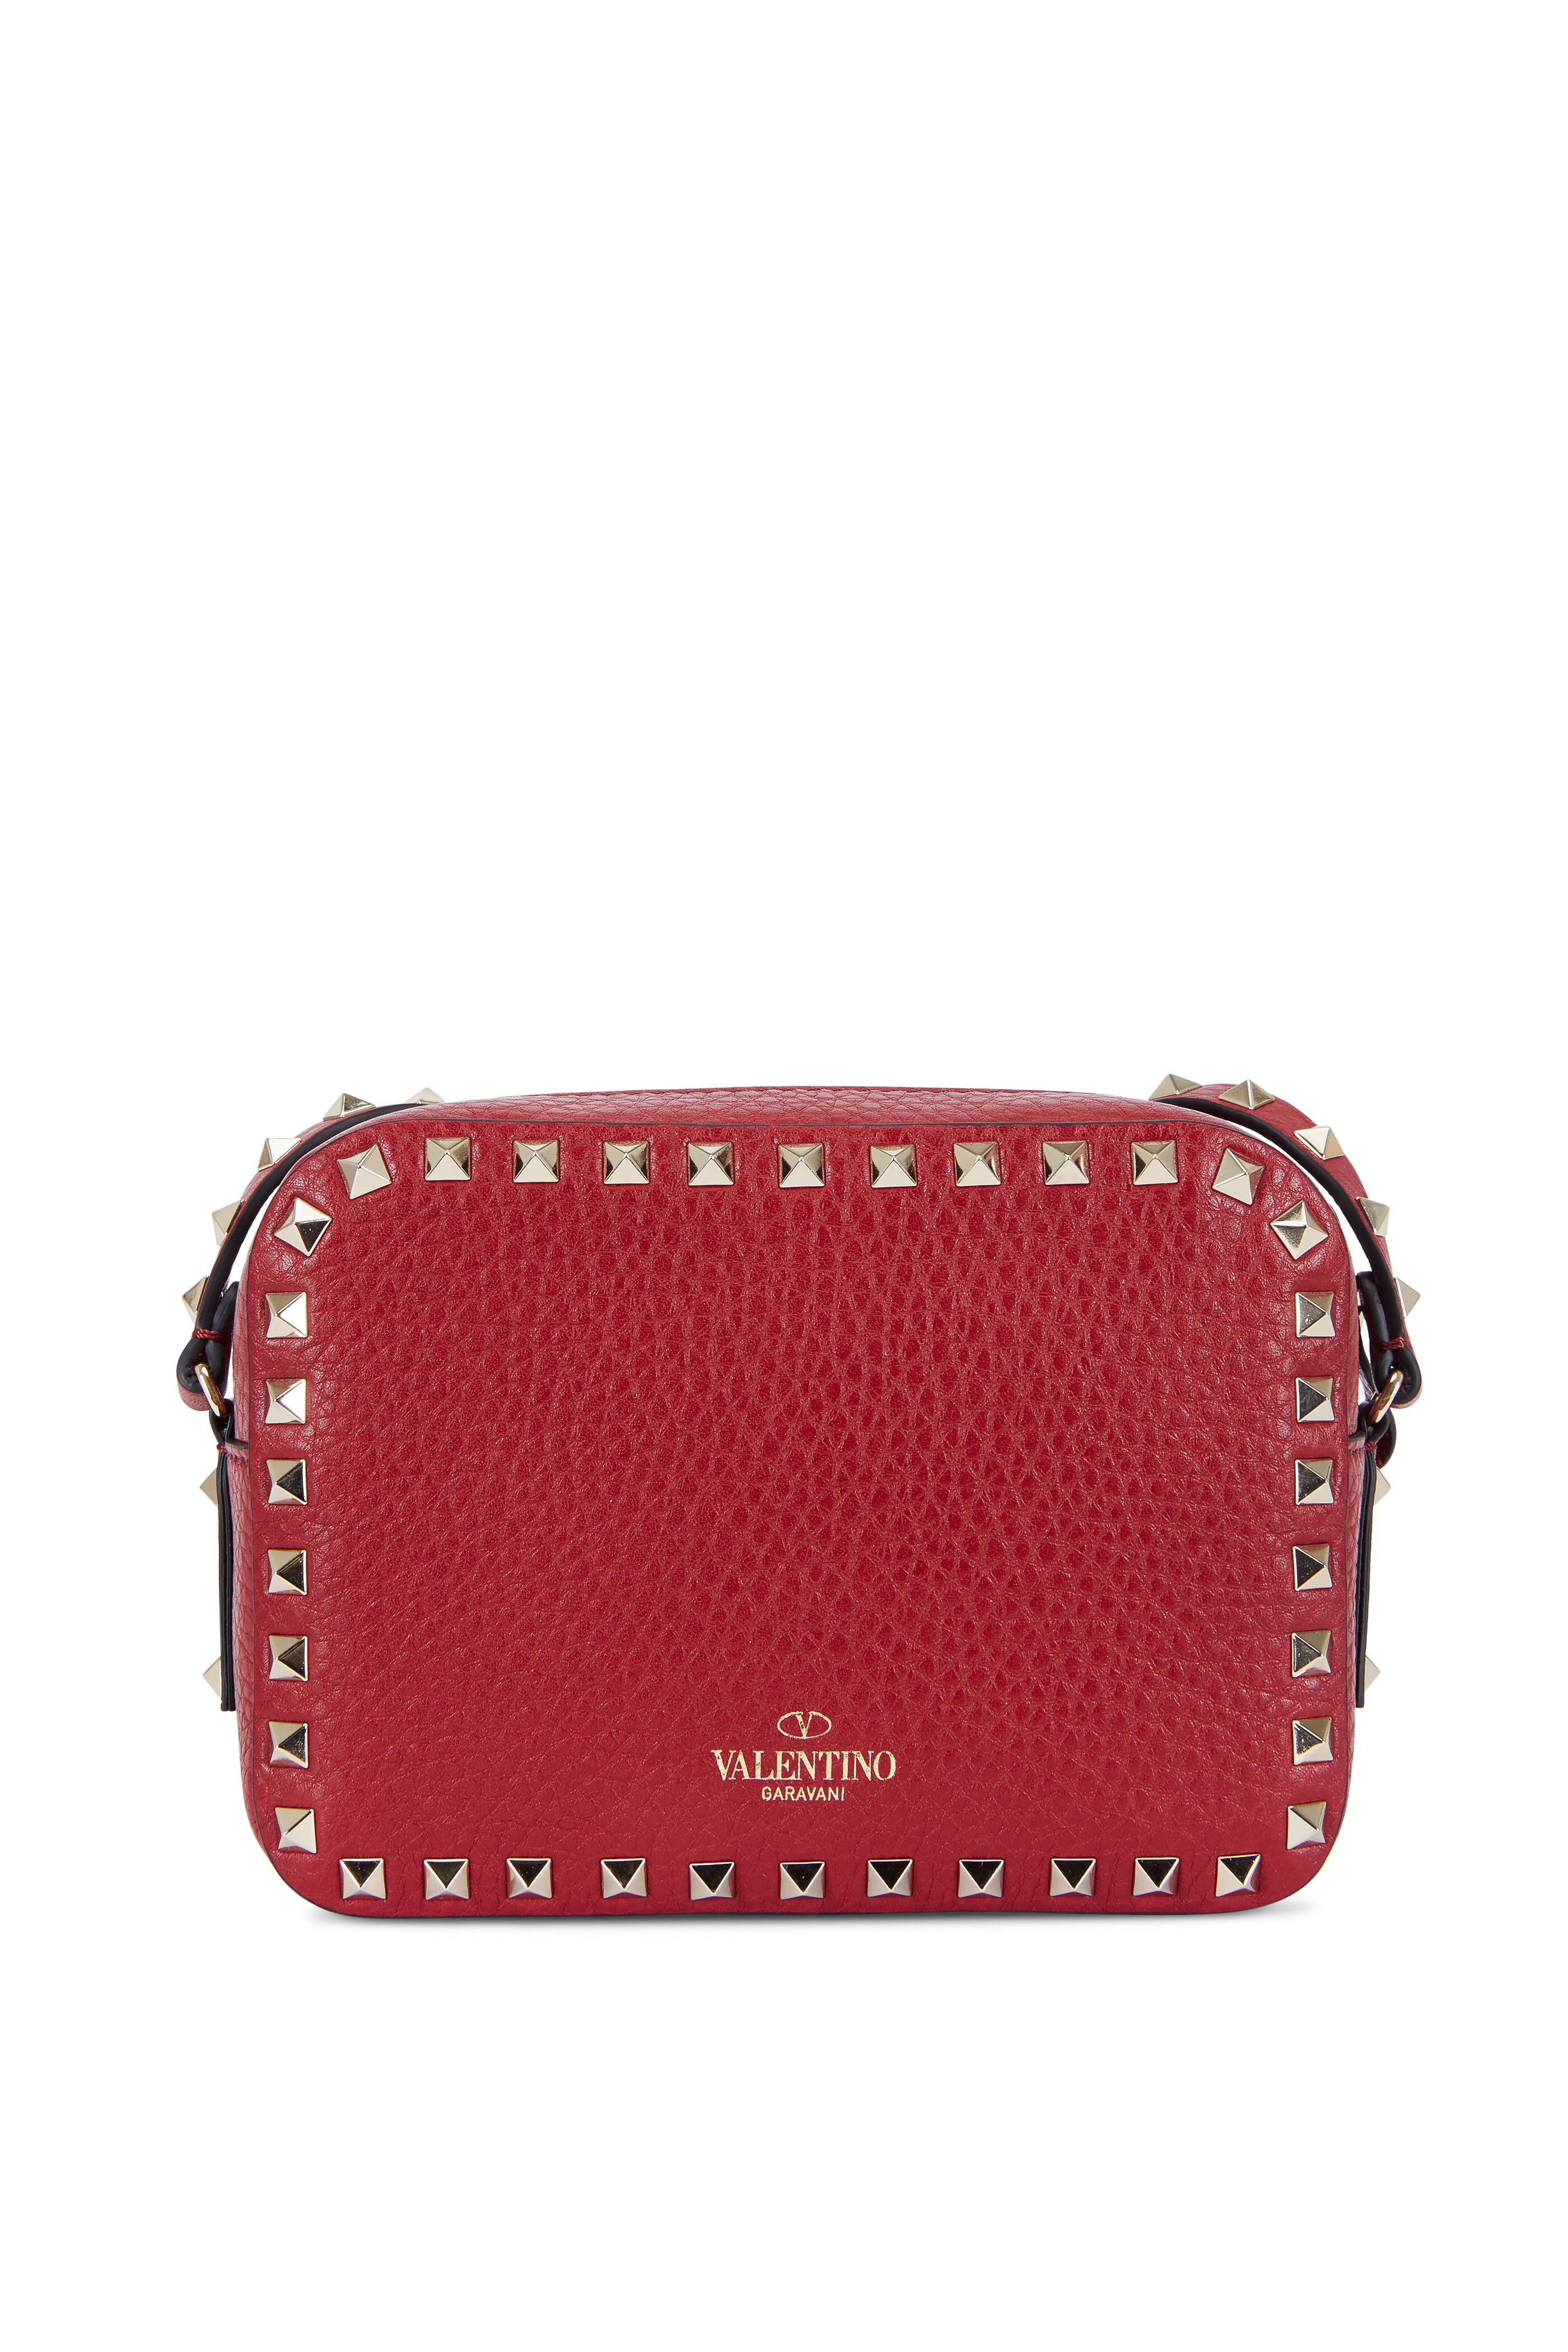 Valentino Red Pebbled Leather Rockstud Double Handle Crossbody Satchel